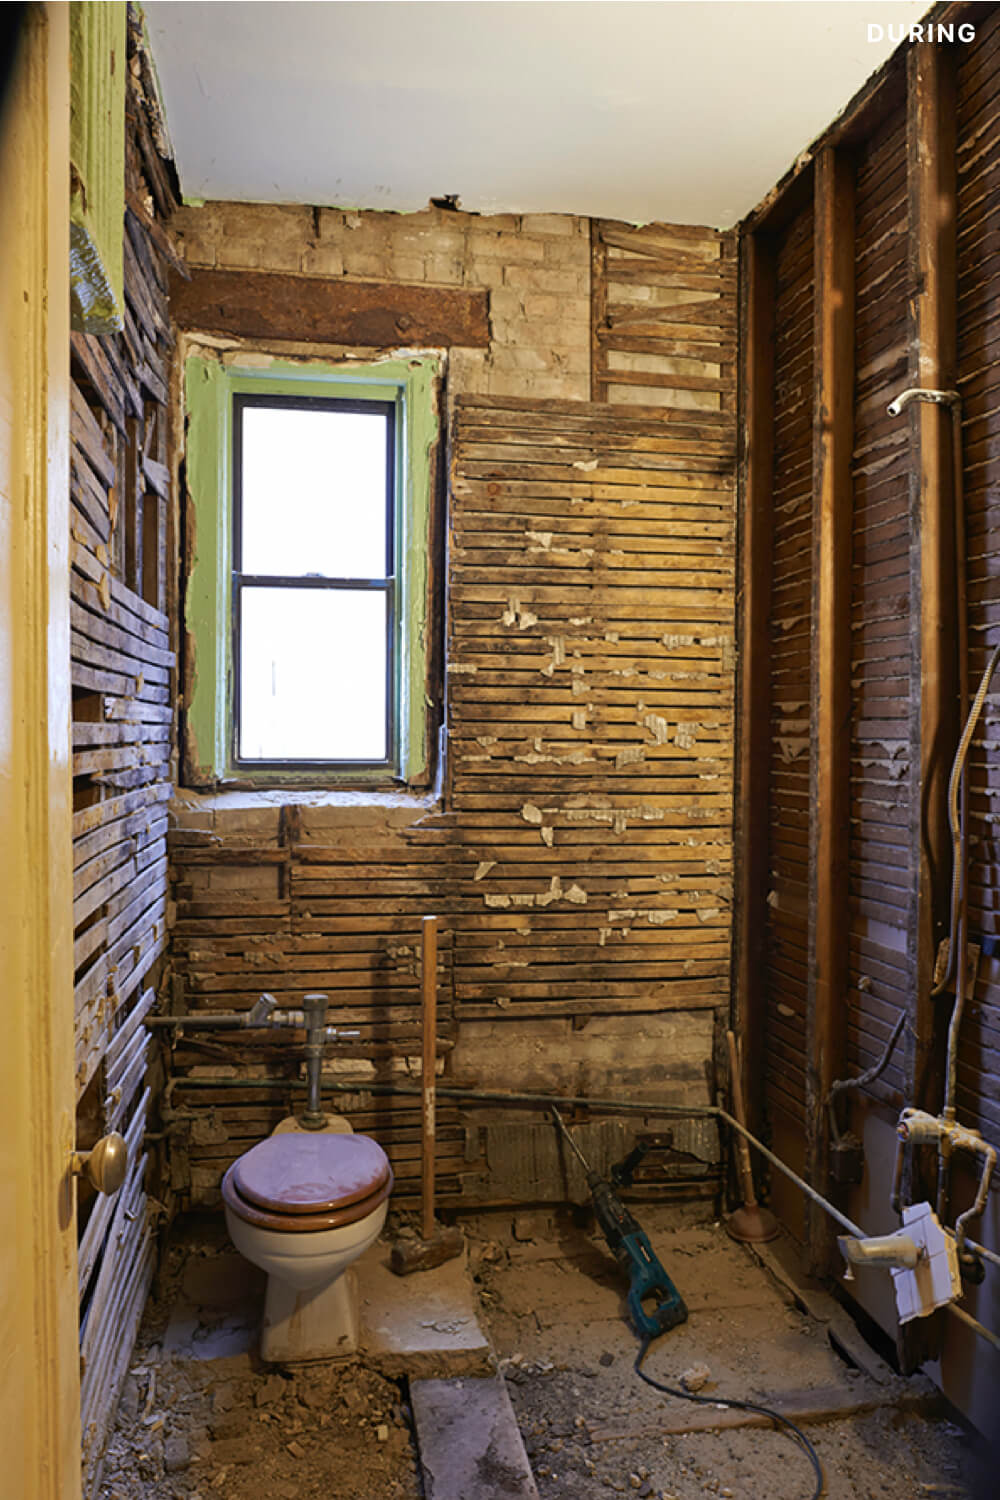 image of demolished bathroom with only toilet remaining during renovation